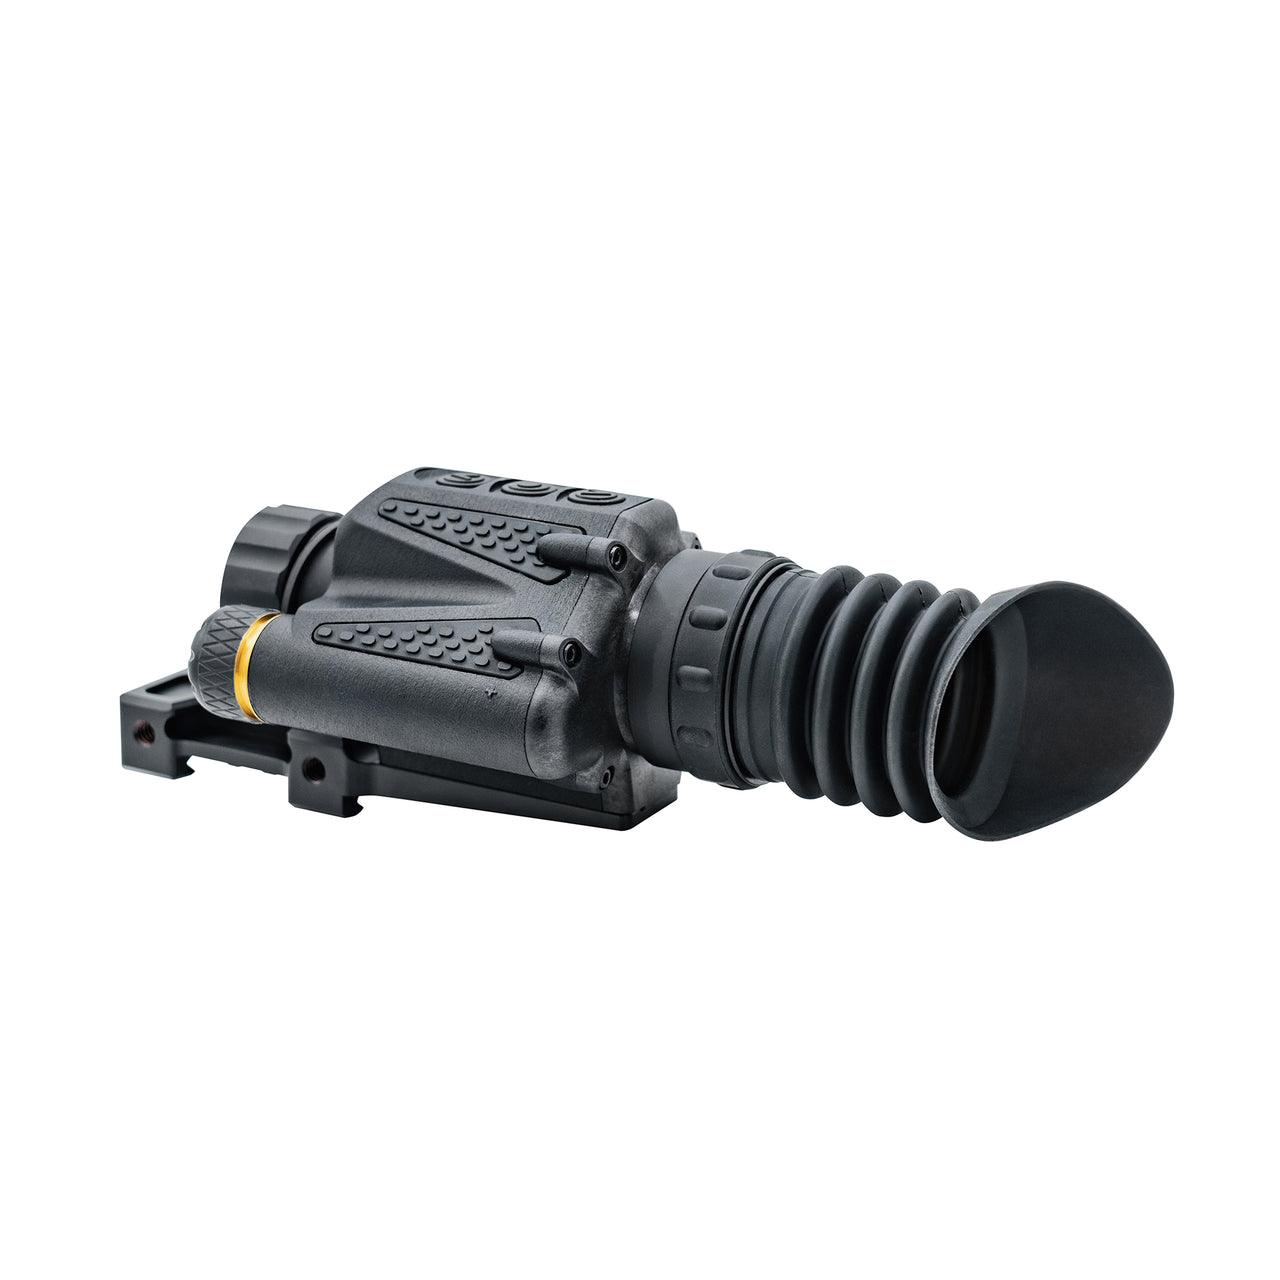 Armasight Collector Compact 640 Thermal Scope 25mm - NVU